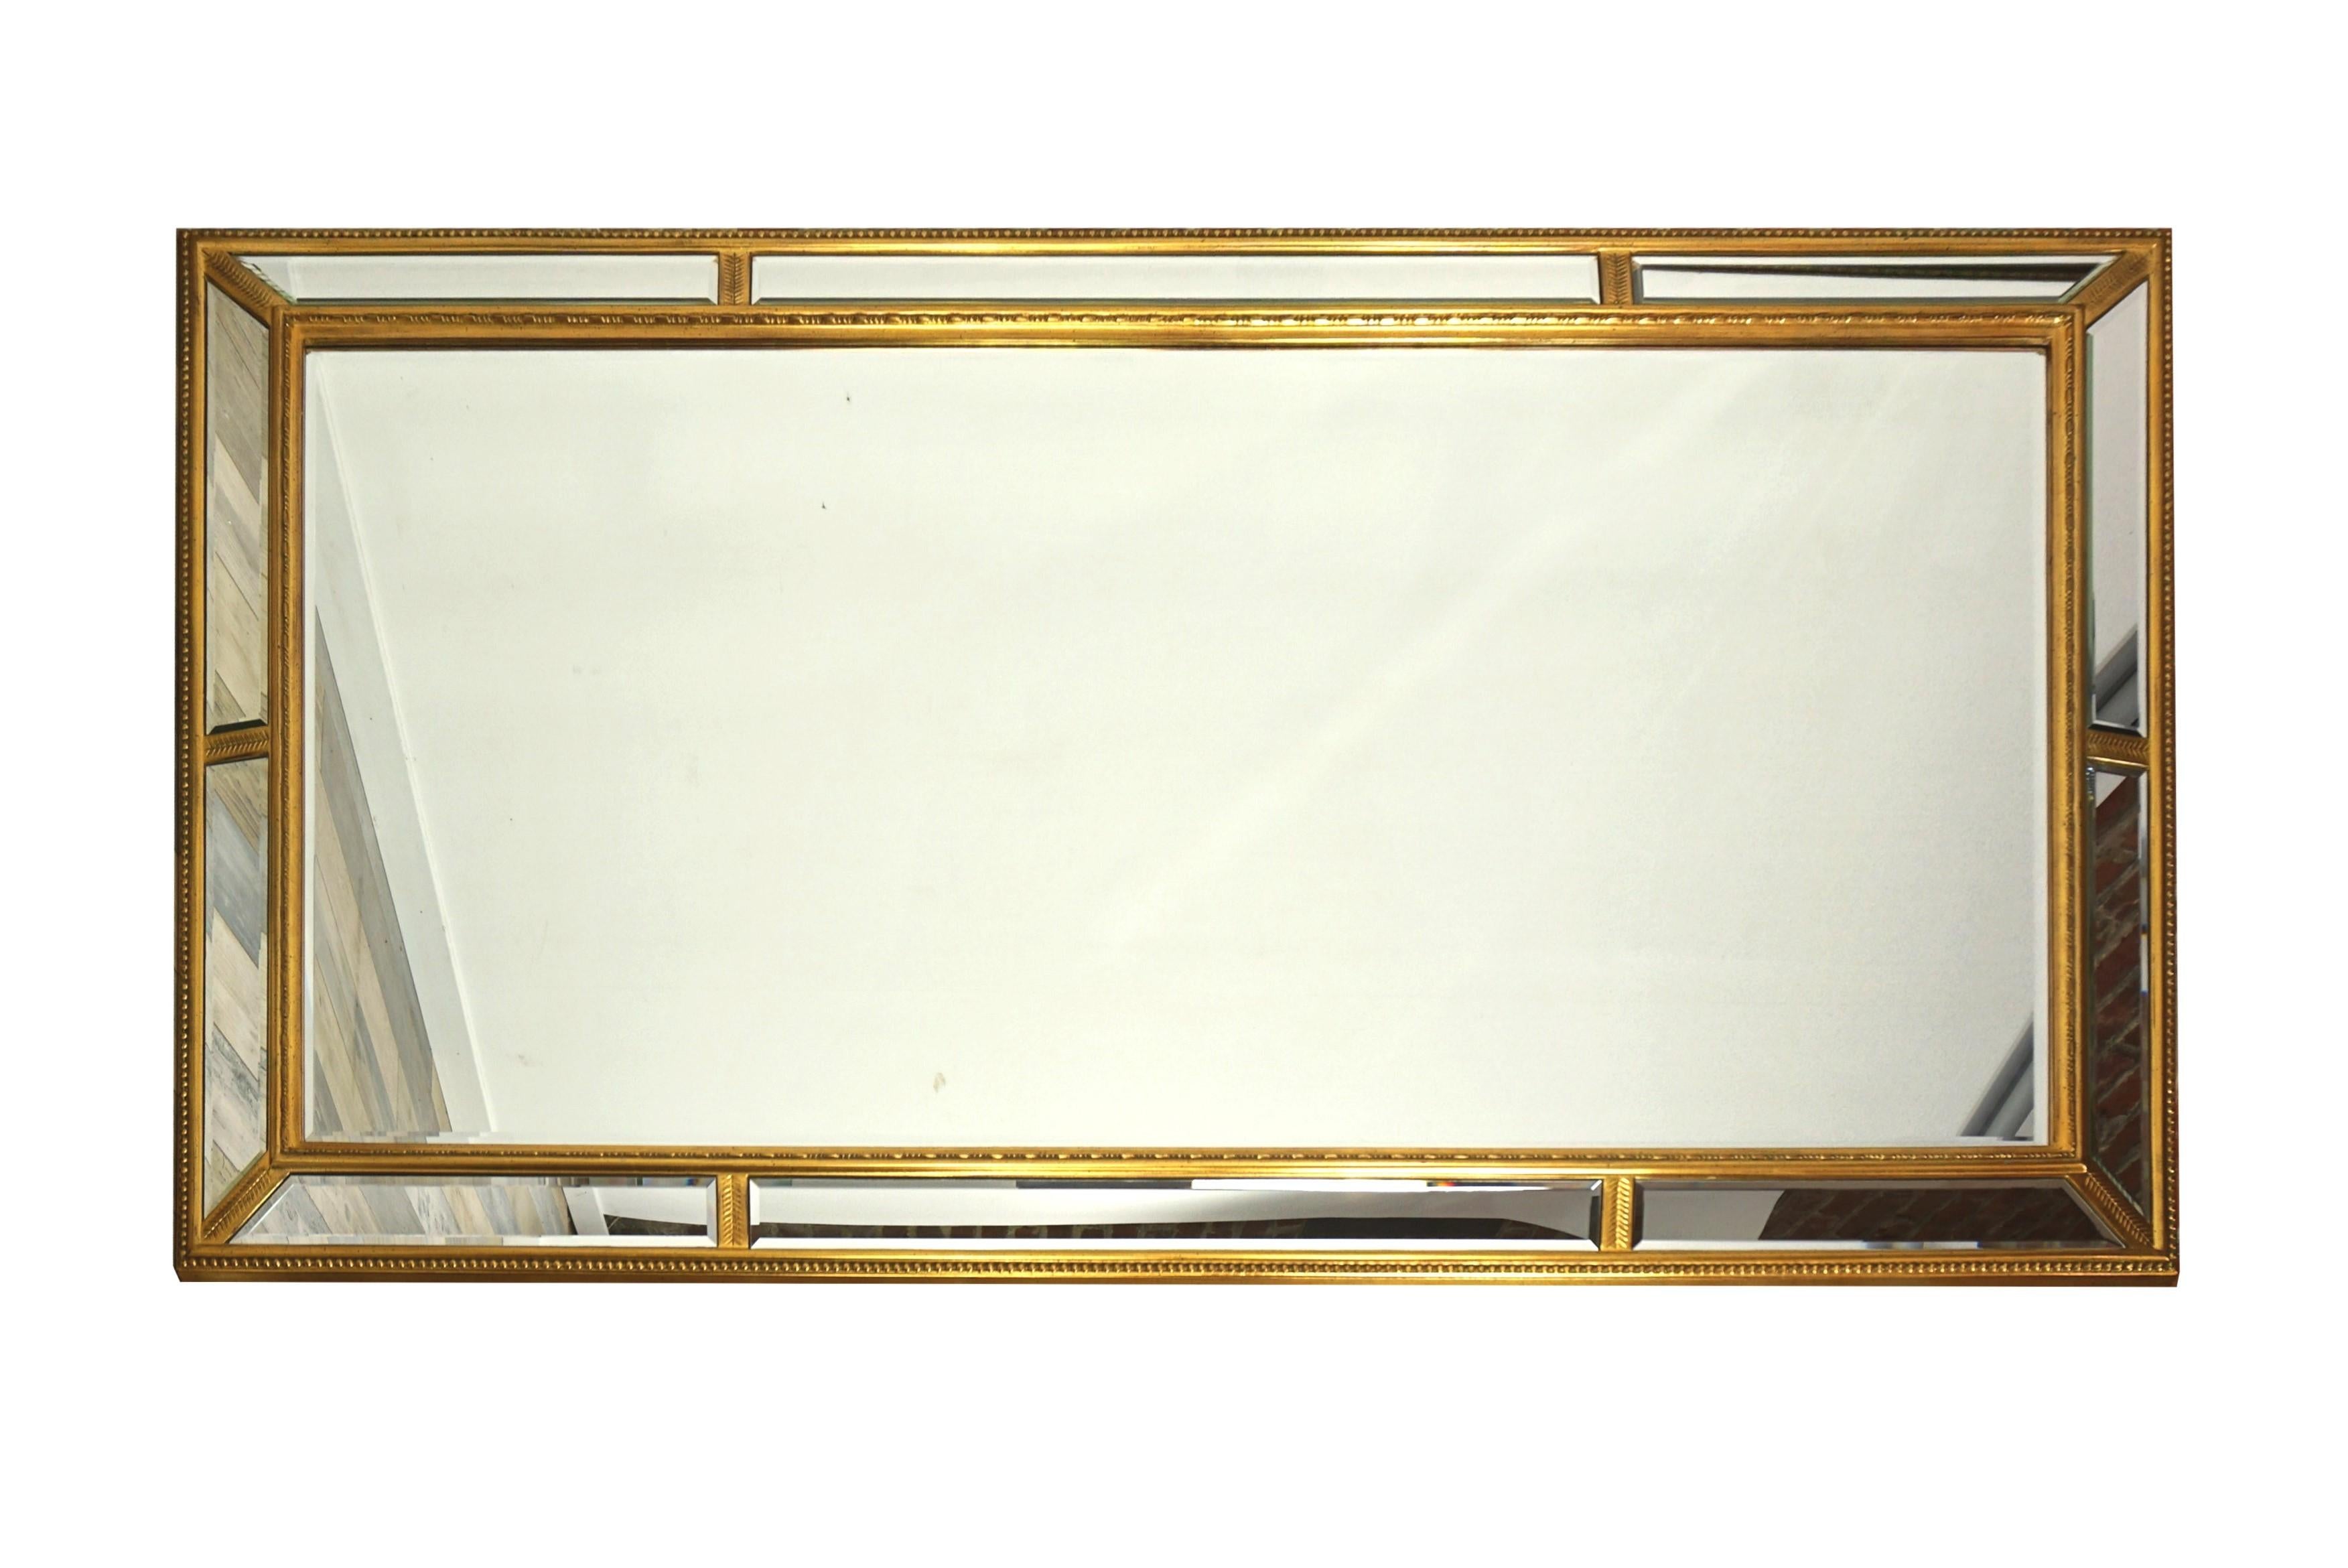 Large mirror with high-quality Deknudt fences. It imposes by its size but also by the quality of its manufacture. The built-in fasteners are designed so you can hang it in portrait or landscape. In perfect condition.